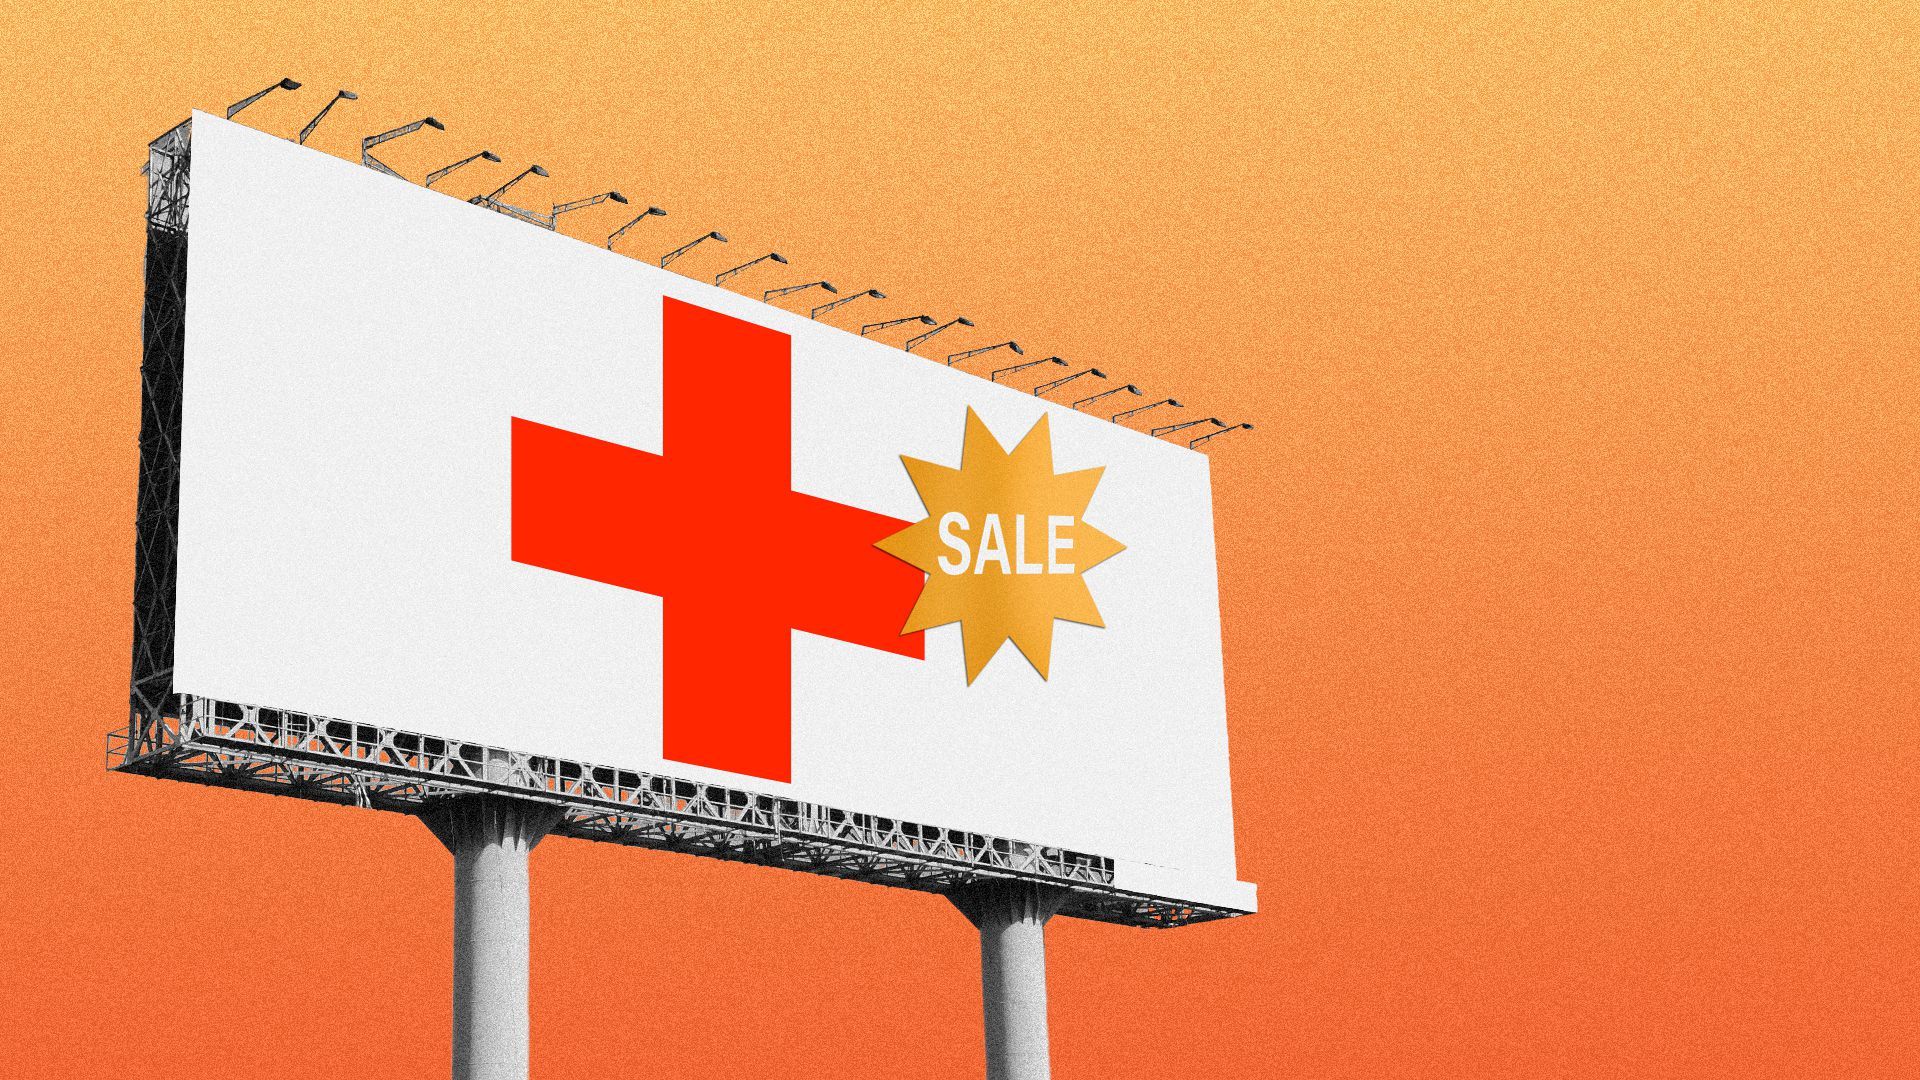 Illustration of a red cross on a billboard with a "SALE" sticker.